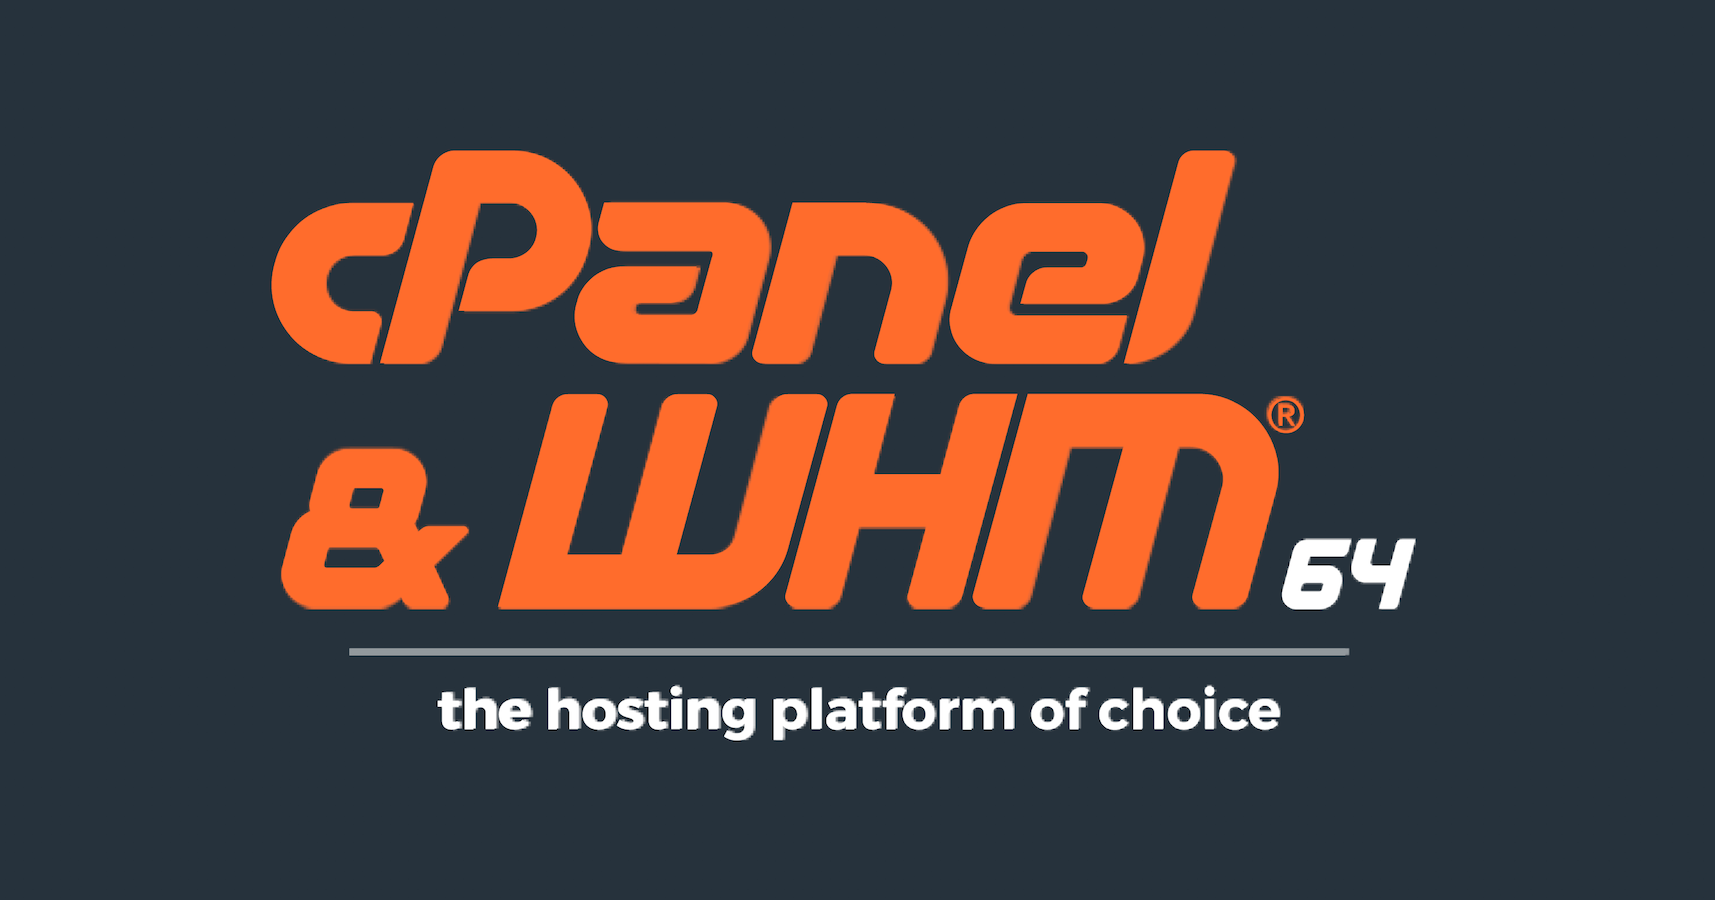 An introduction to cPanel hosting